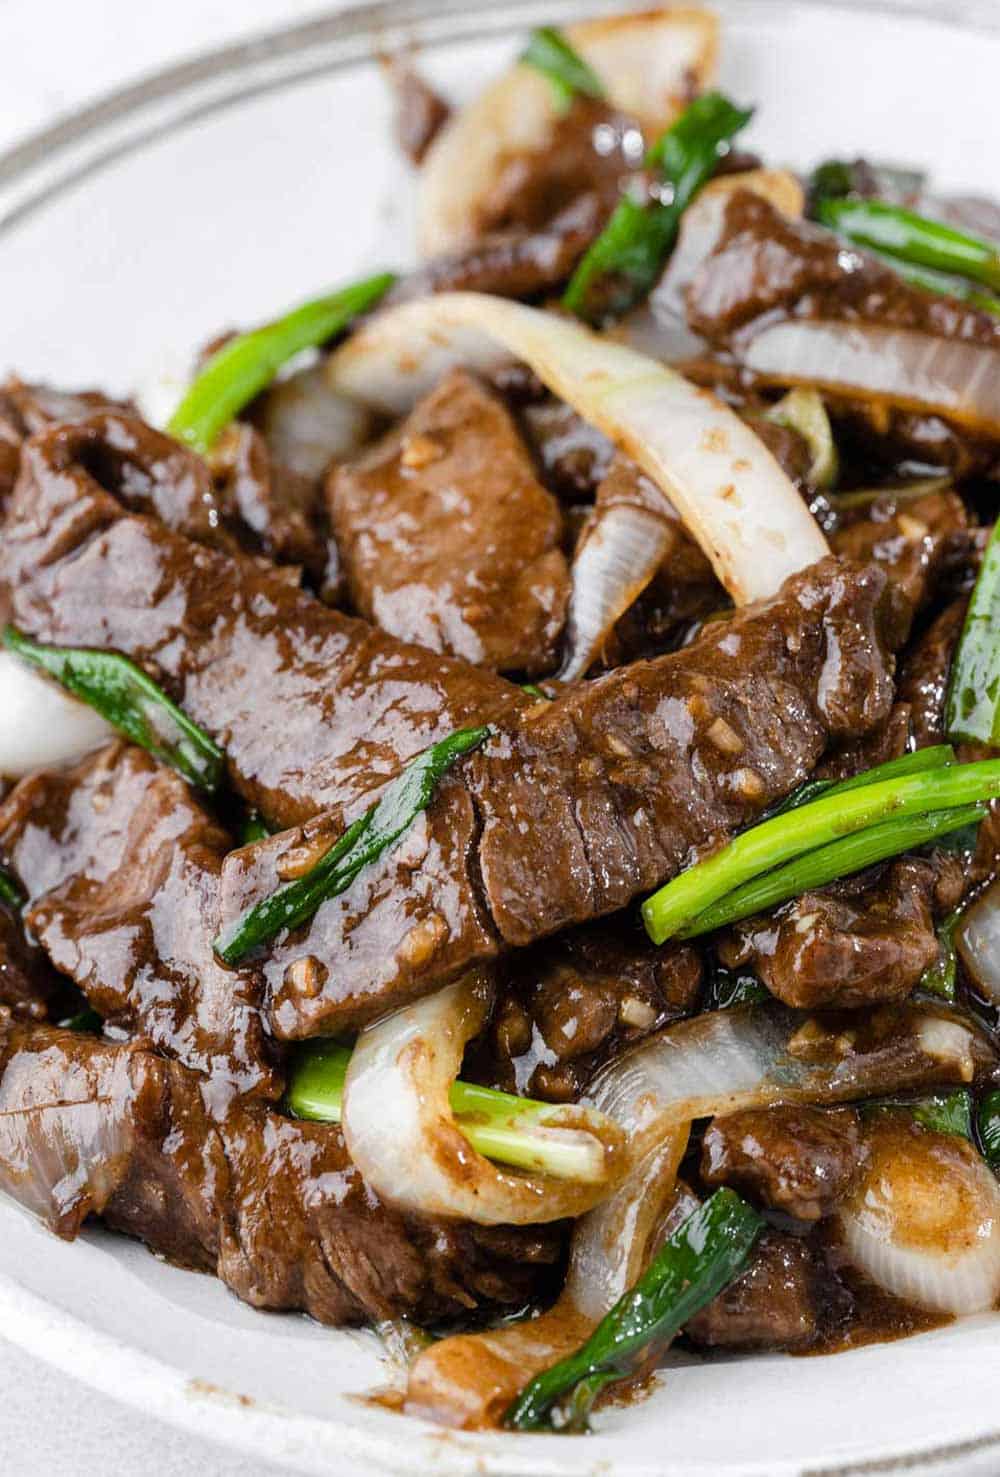 Savory beef and onion stir fry served on a plate, garnished with green onions .